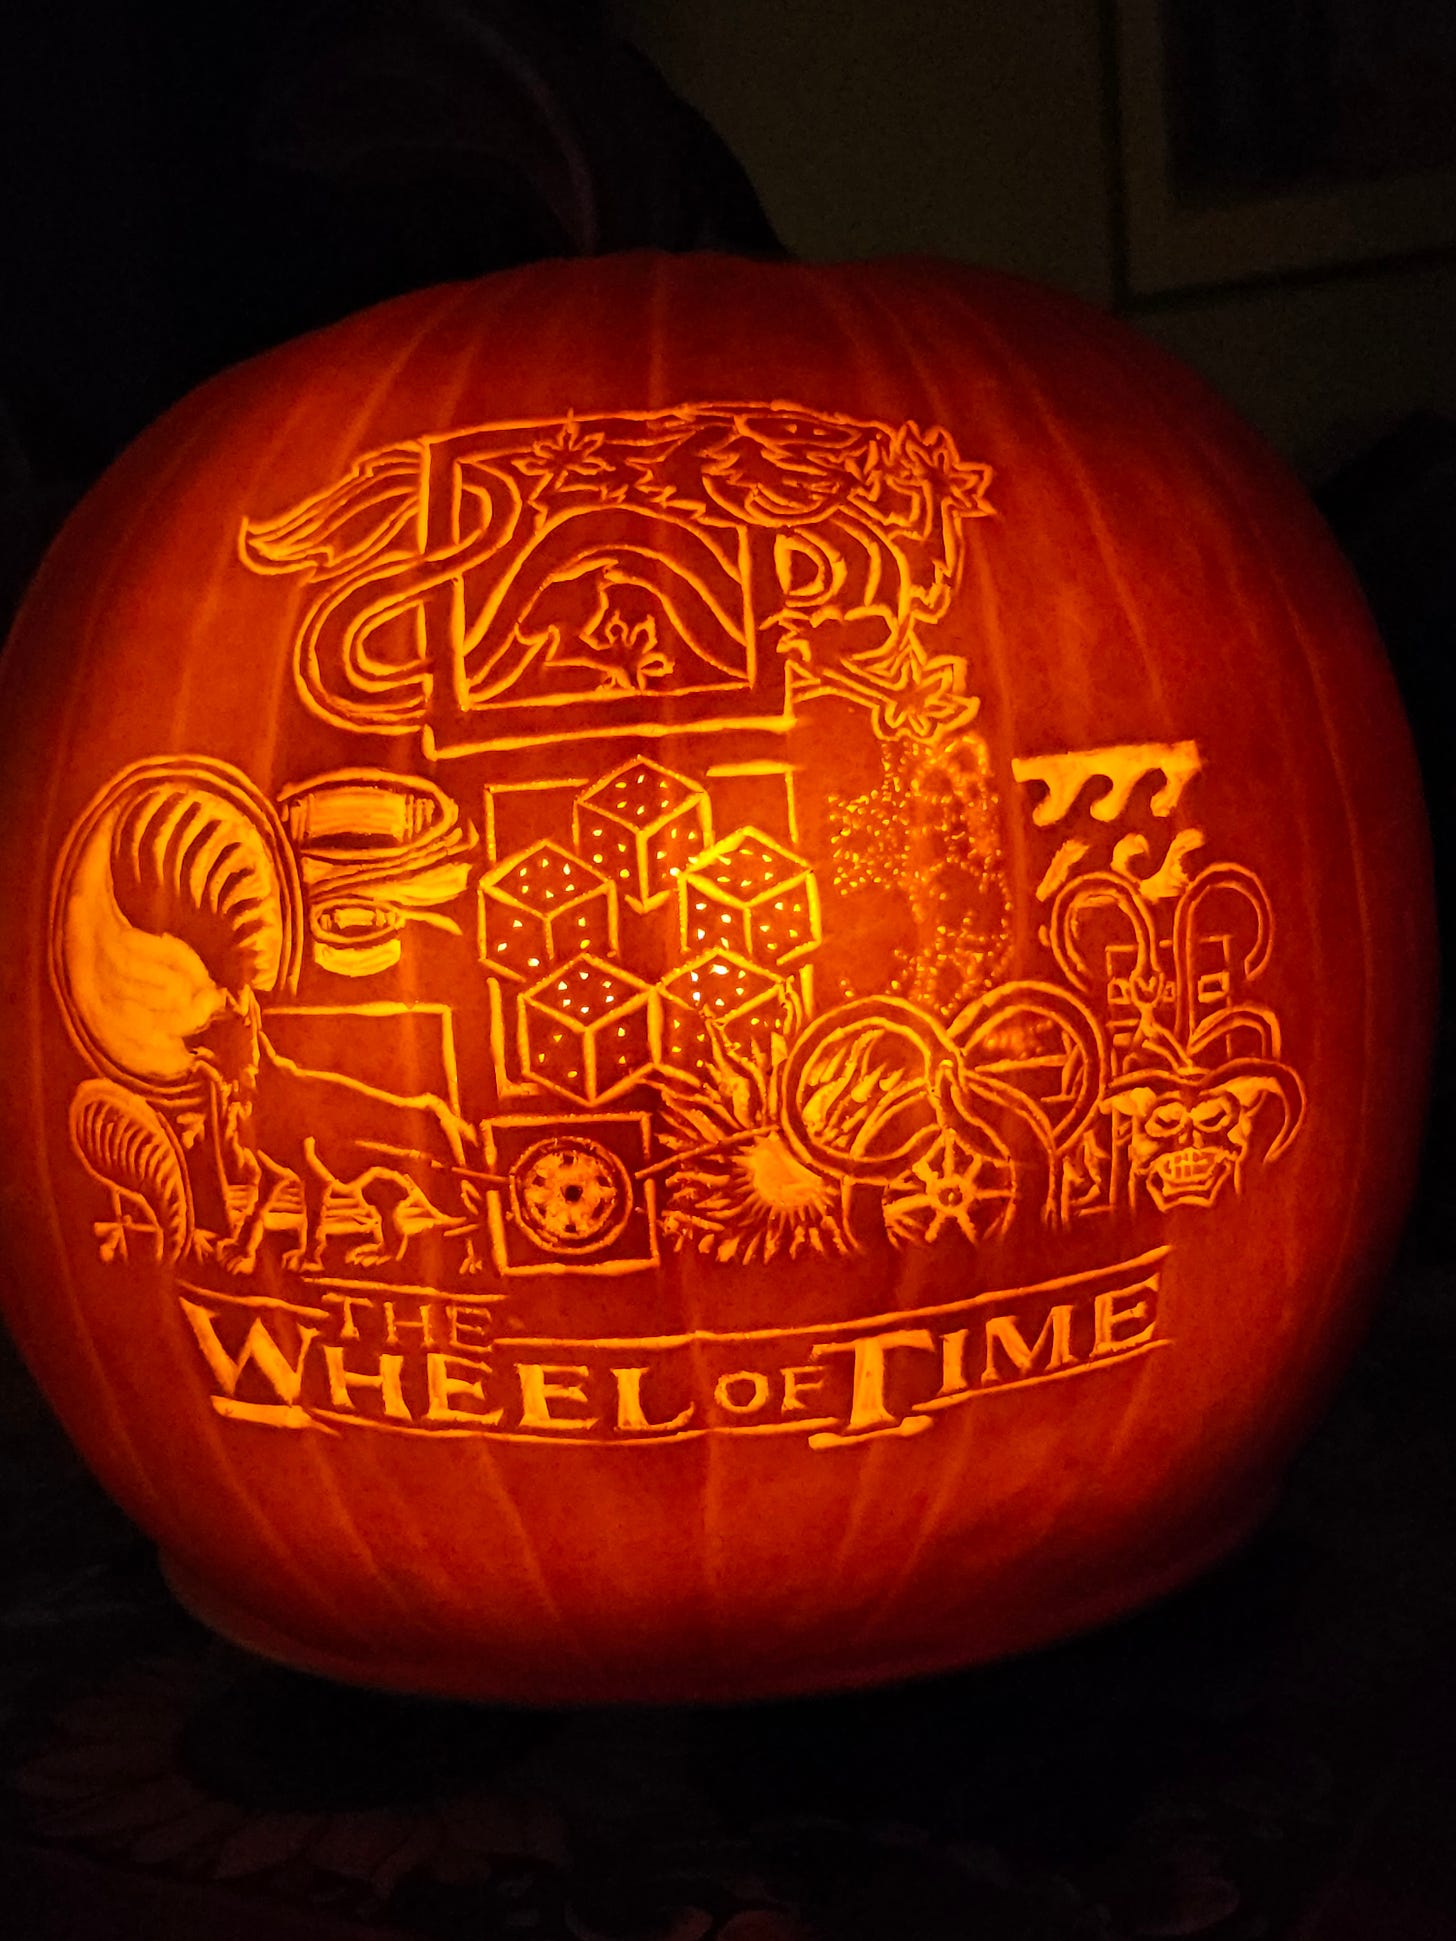 Pumpkin carved with motifs from the Wheel of Time. Based on a design by Reddit user Mahranaka, used by kind permission.